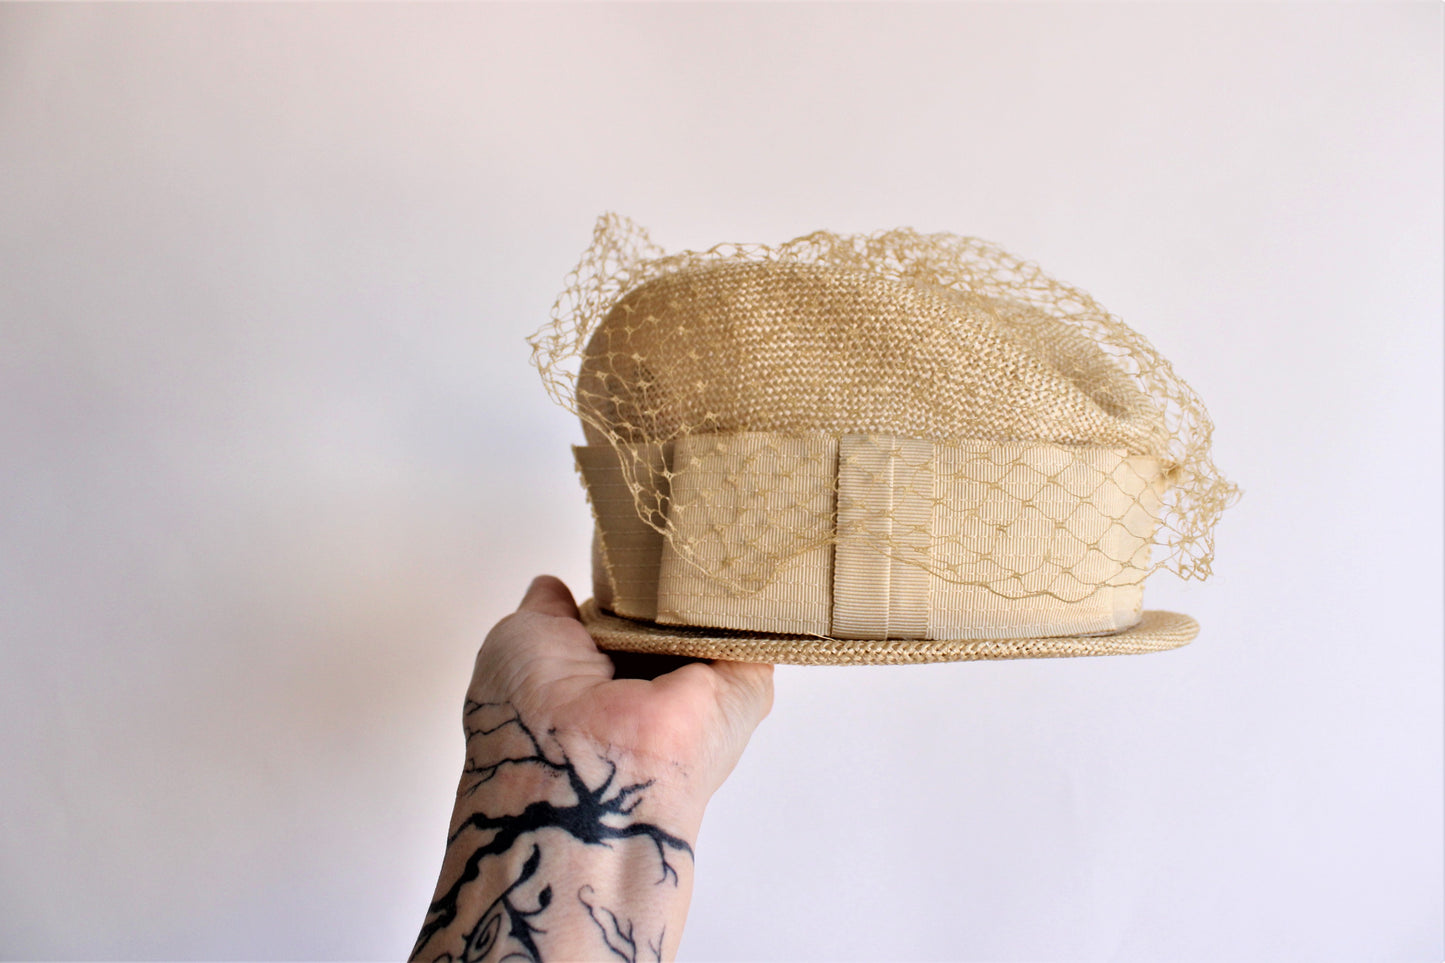 Vintage 1950s Straw Cloche Hat with Veil and Bow